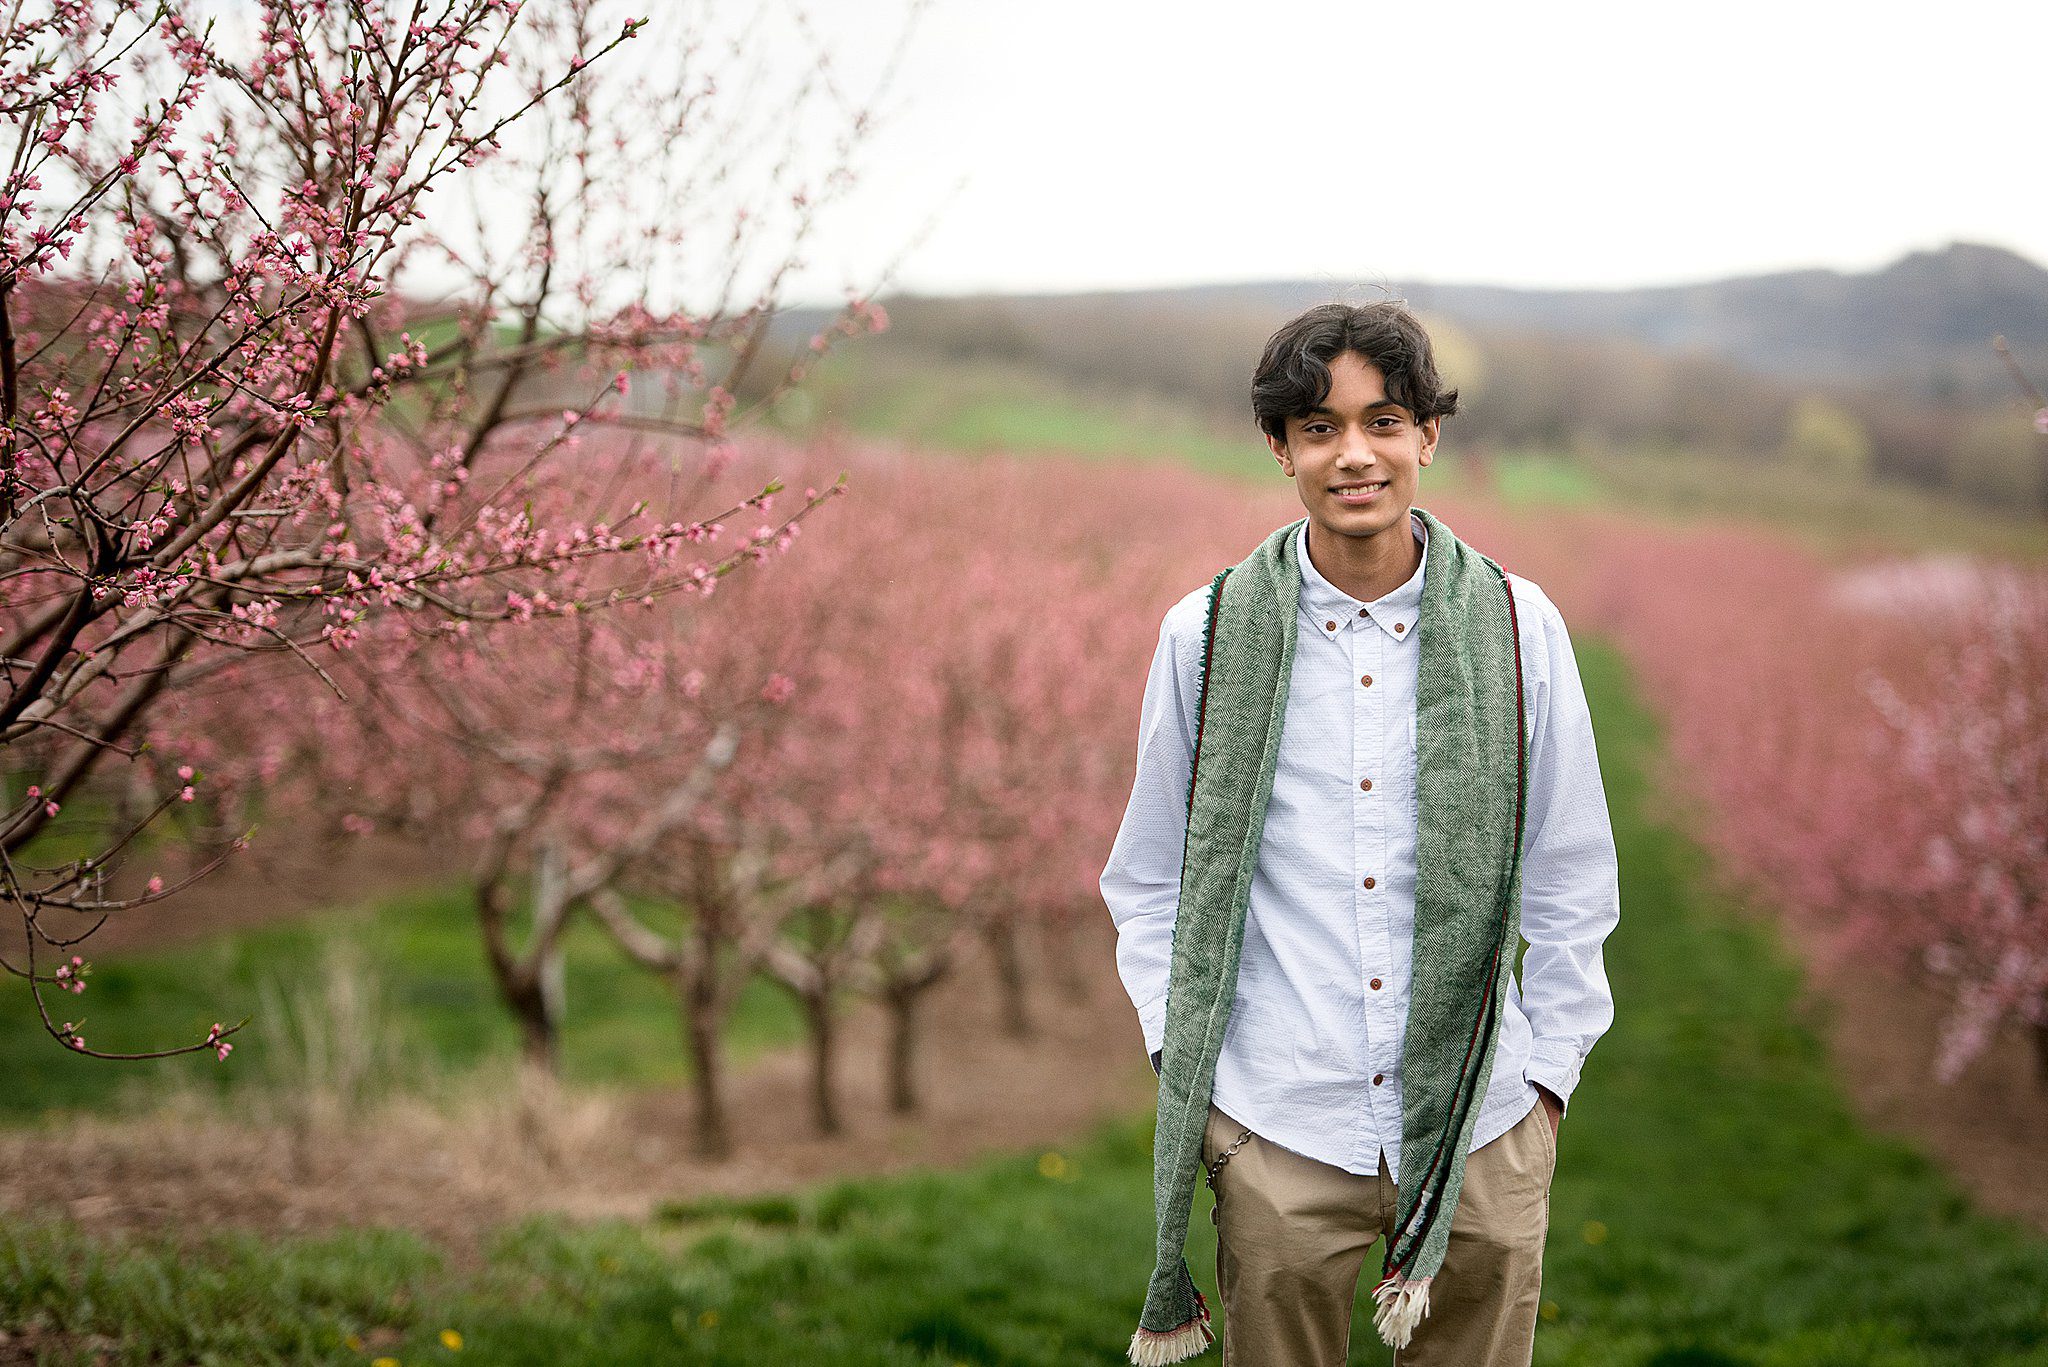 A man in a white shirt and green scarf stands in an orchard of pink blooming trees with hands in pockets during things to do in guilford ct